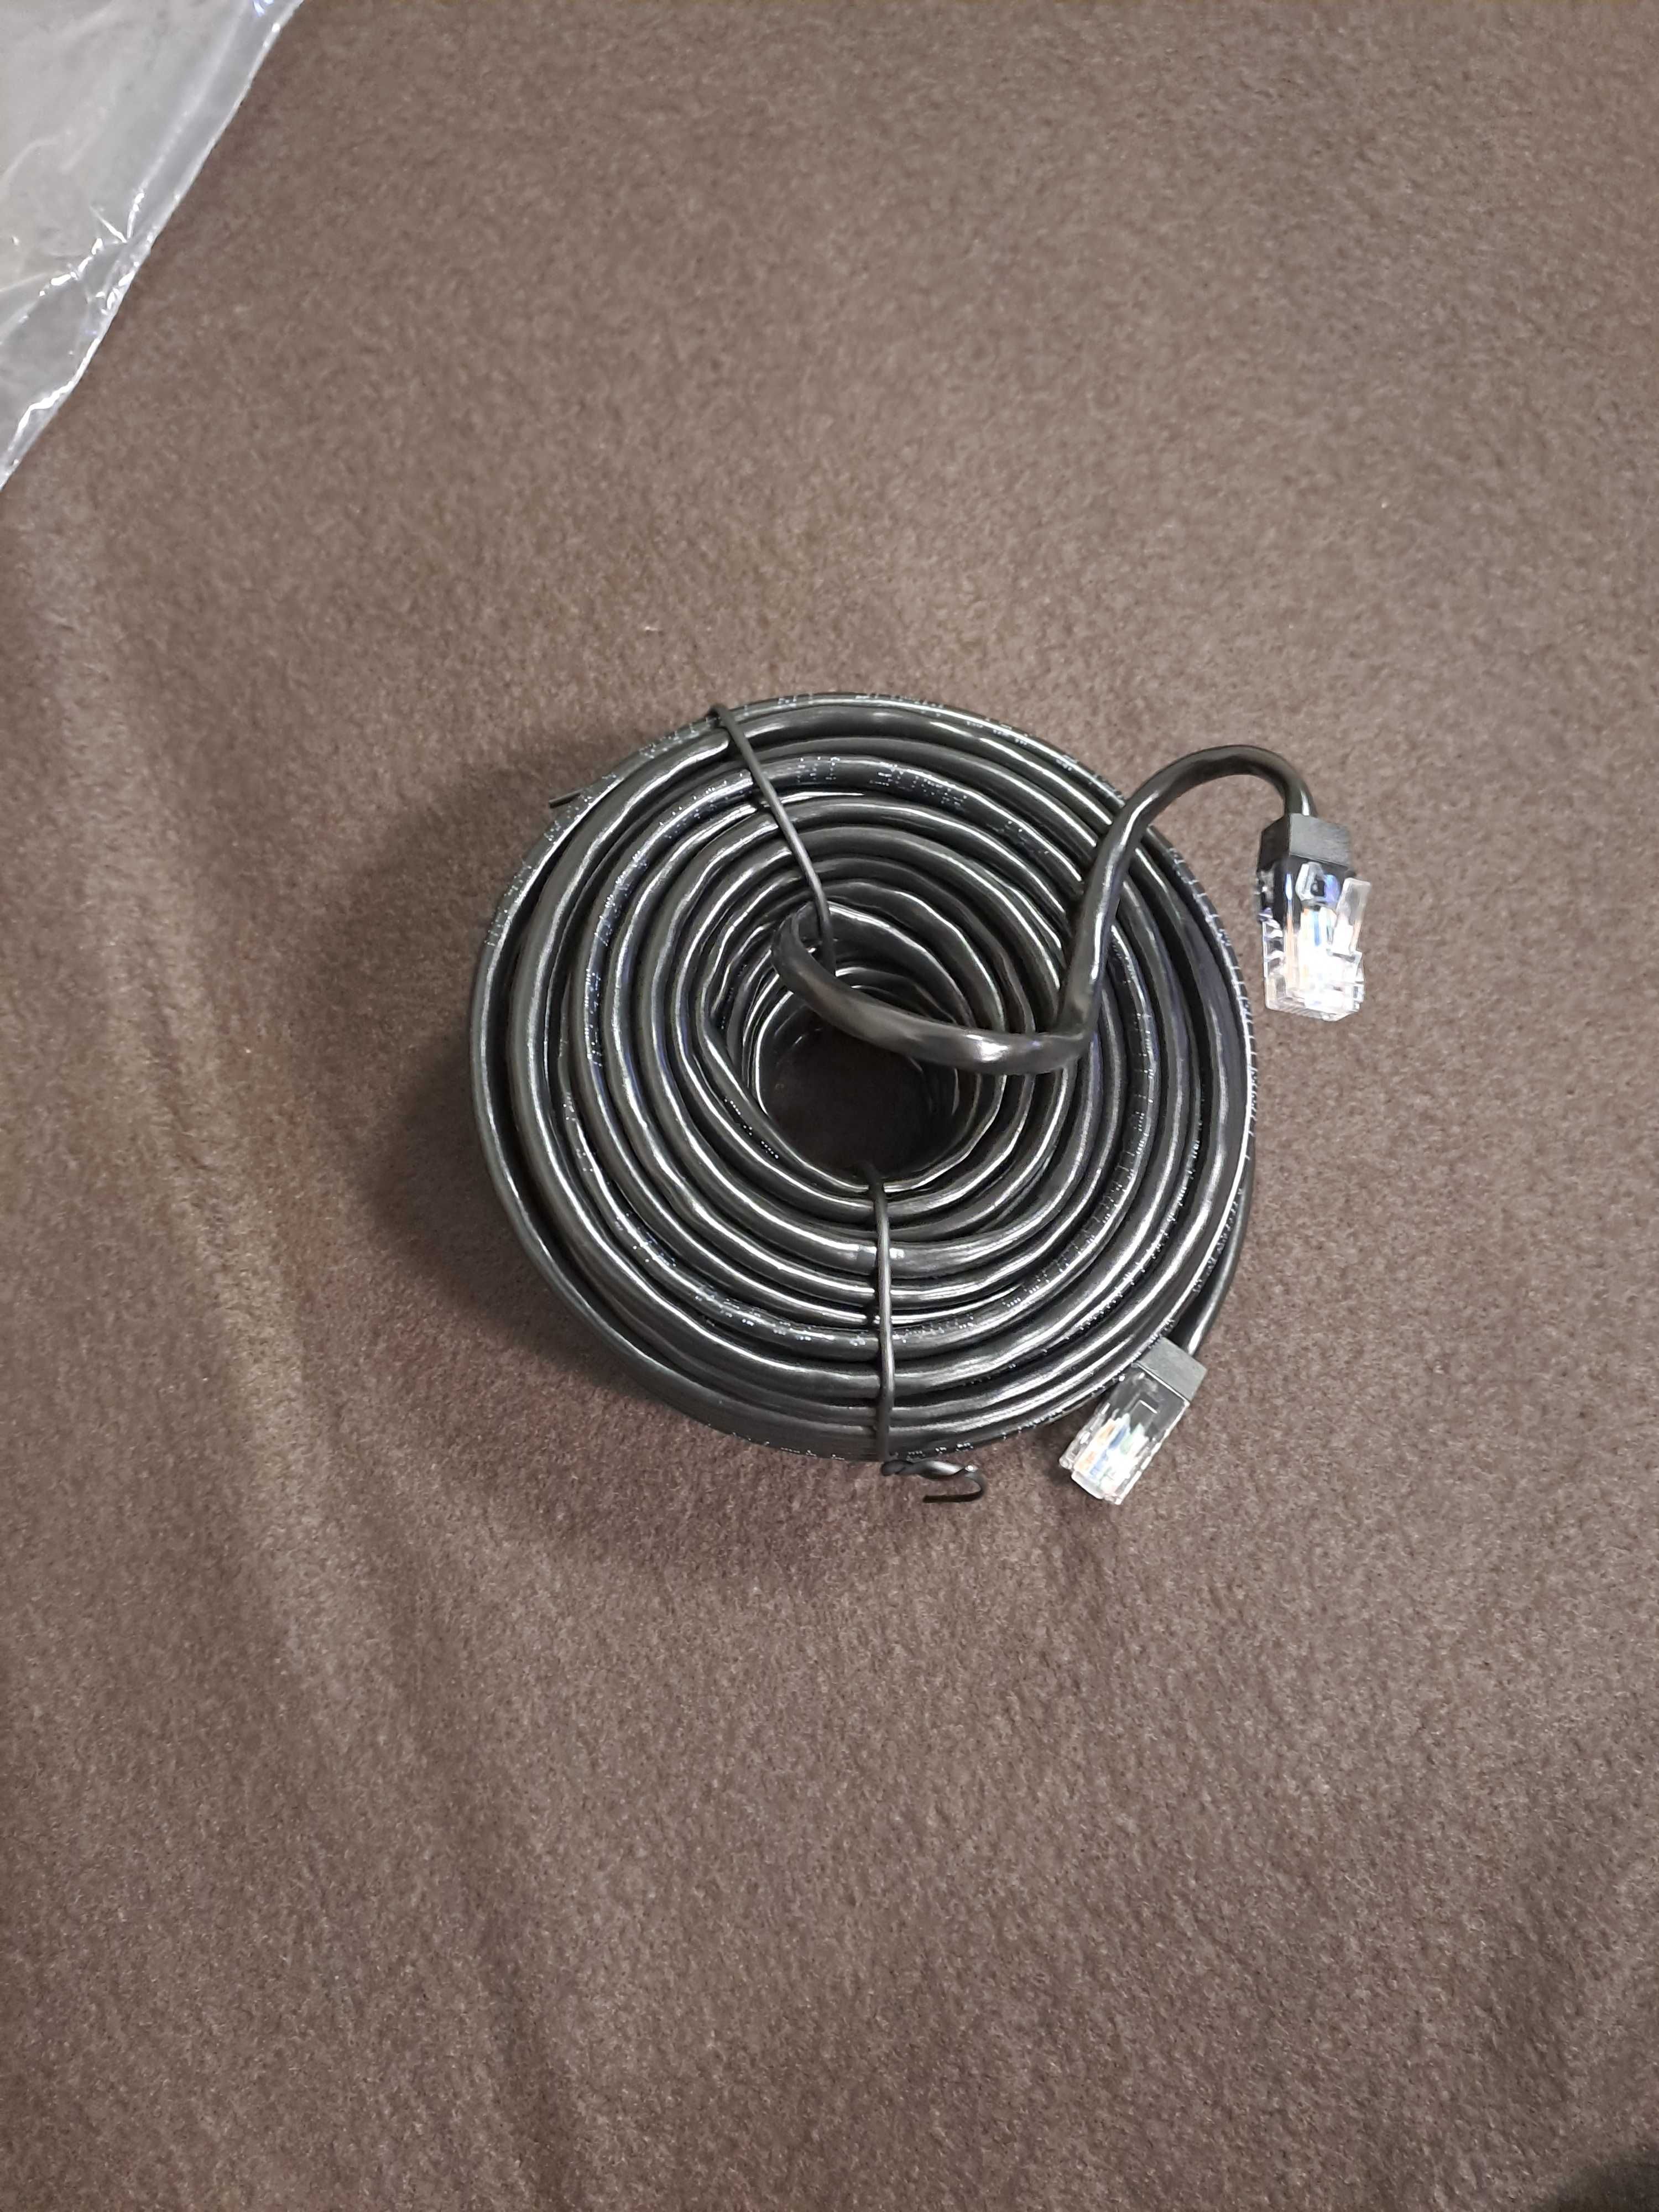 Лан кабел, пач кабел, utp cable, lan cable